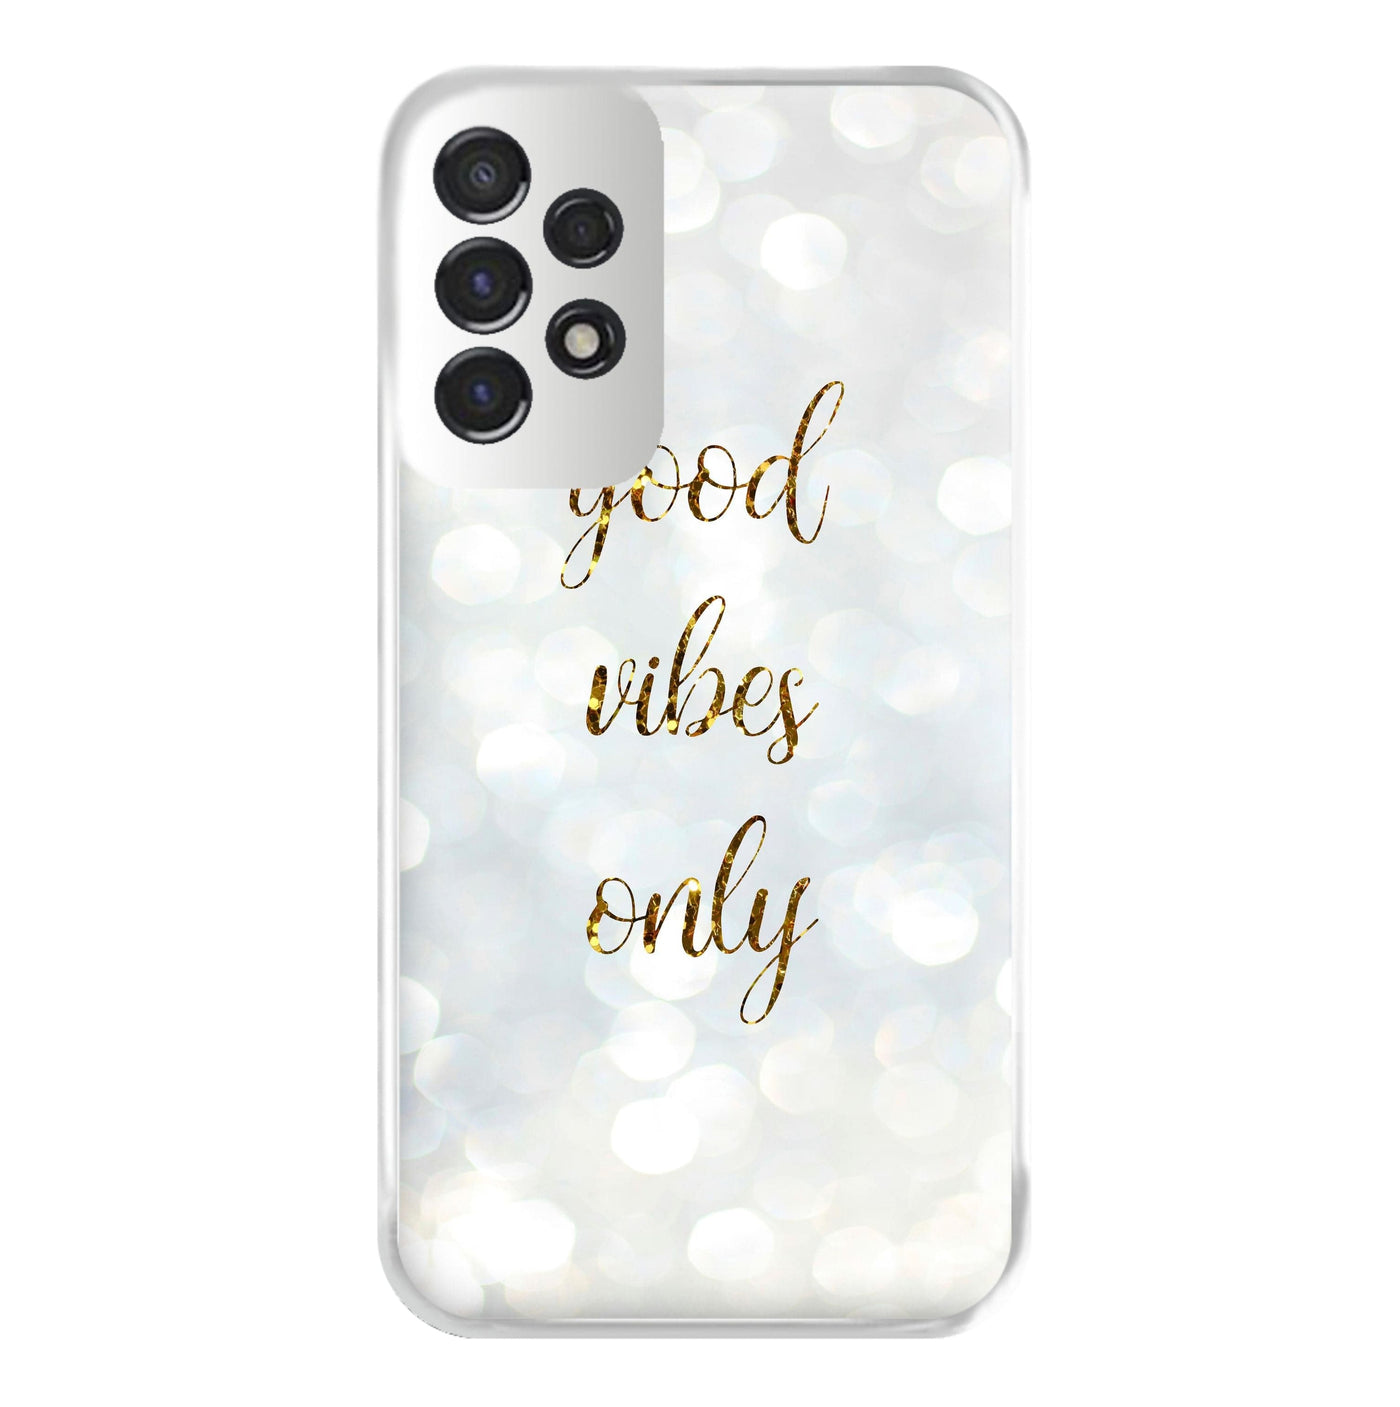 Good Vibes Only - Glittery Phone Case